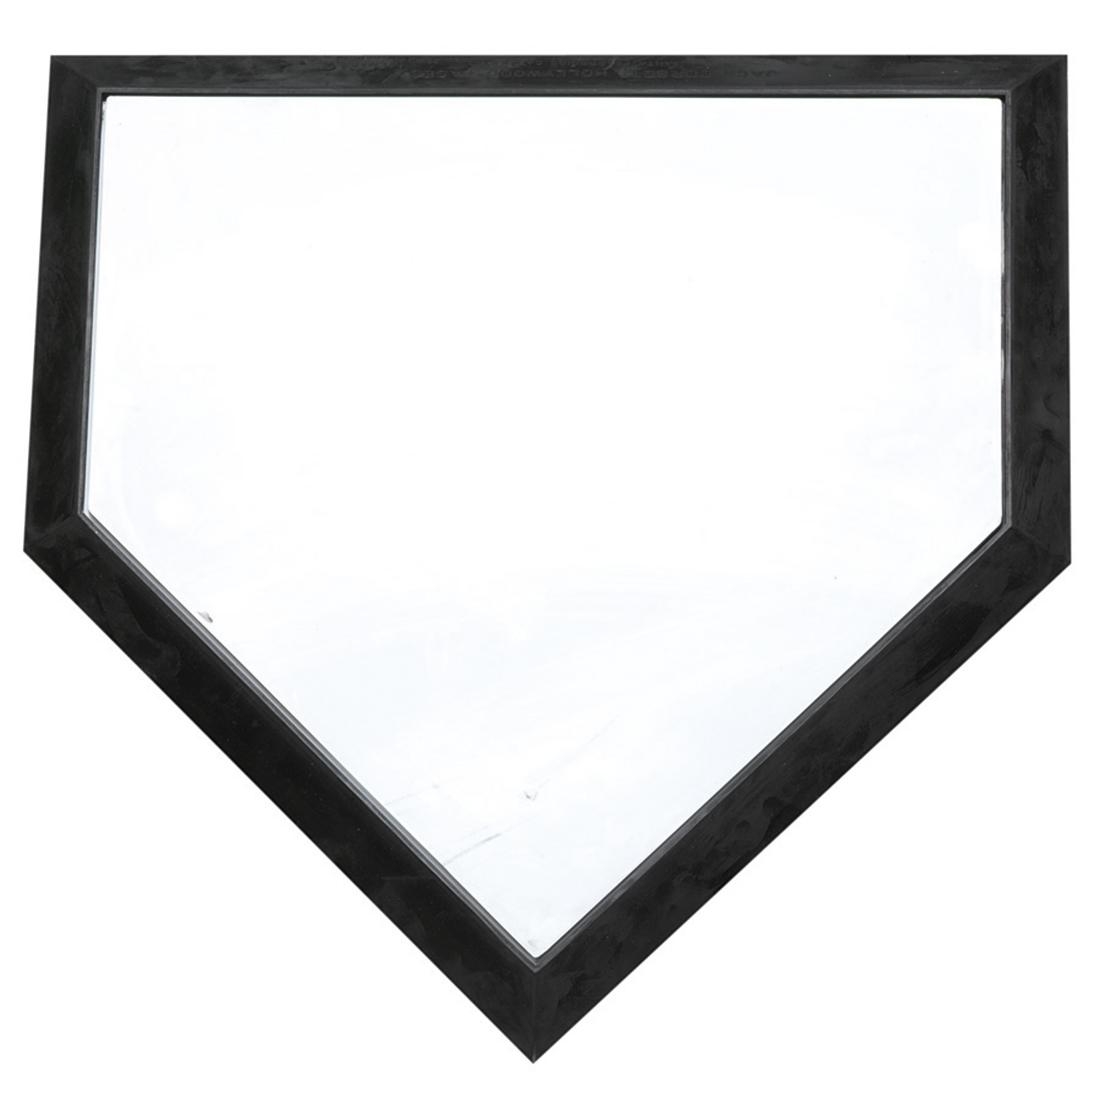 Baseball clipart plate, Baseball plate Transparent FREE for download on ...